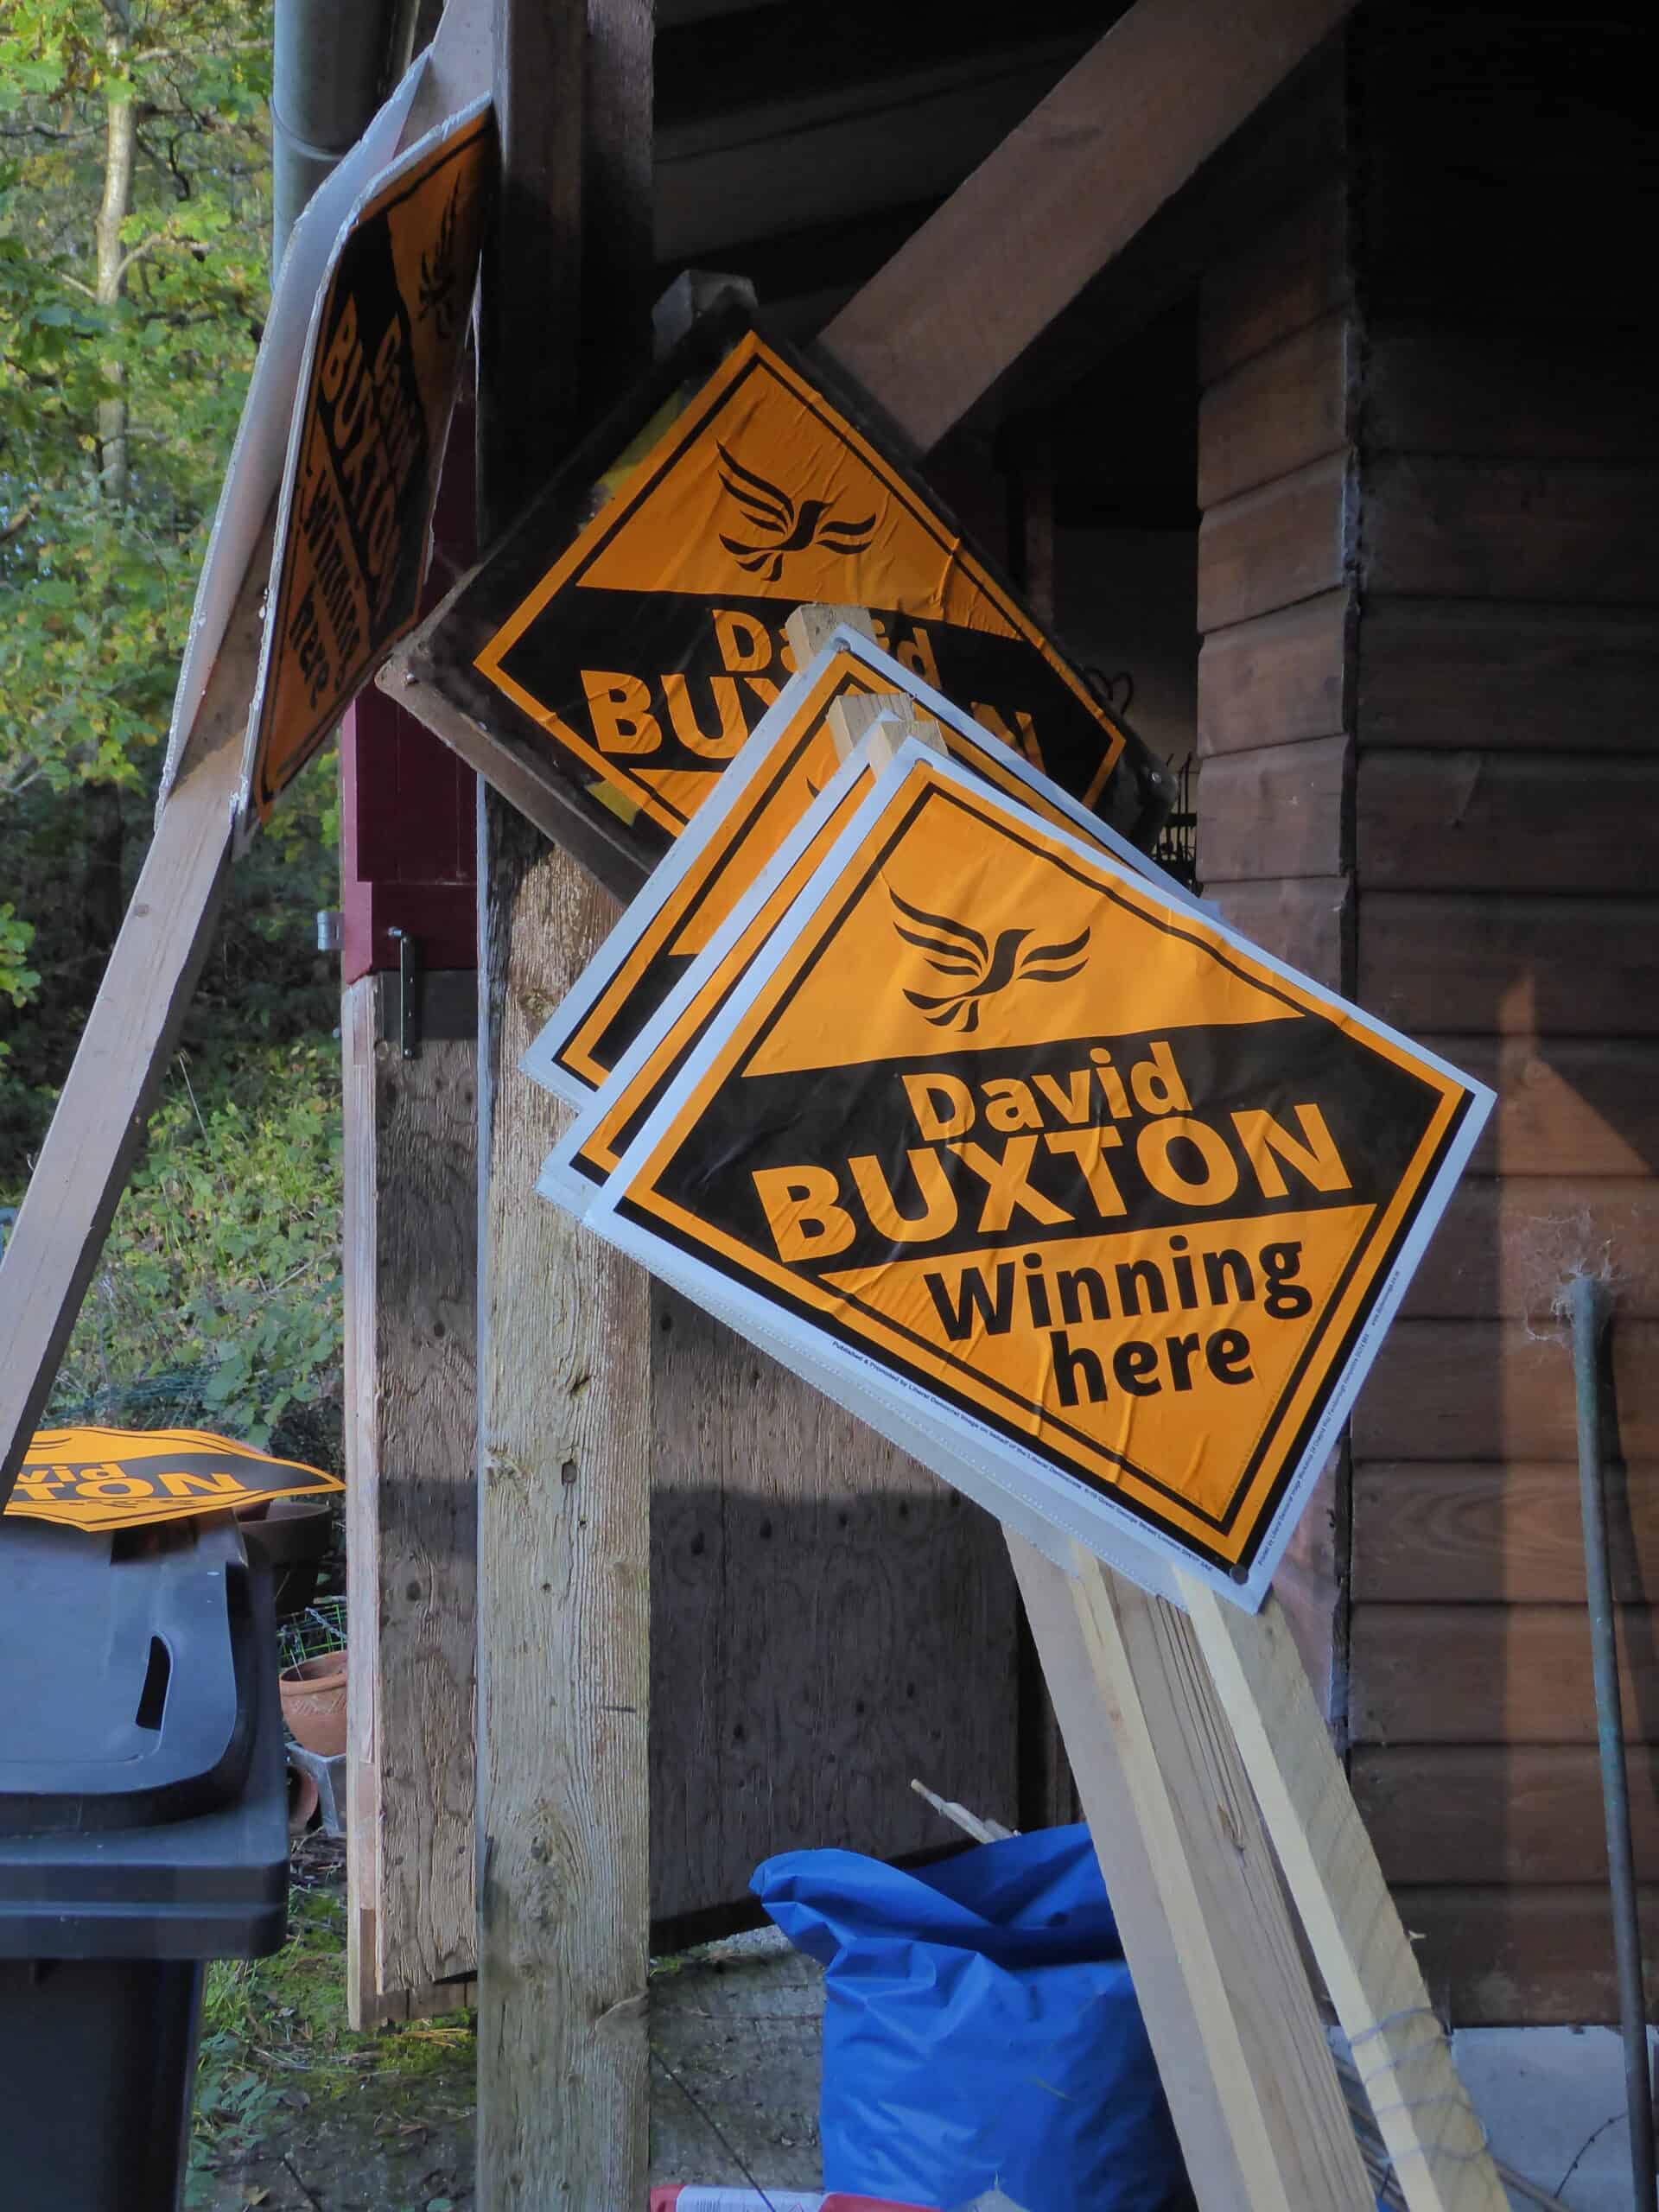 Stack of yellow campaign signs for david buxton leaning against a wooden structure in a wooded area.